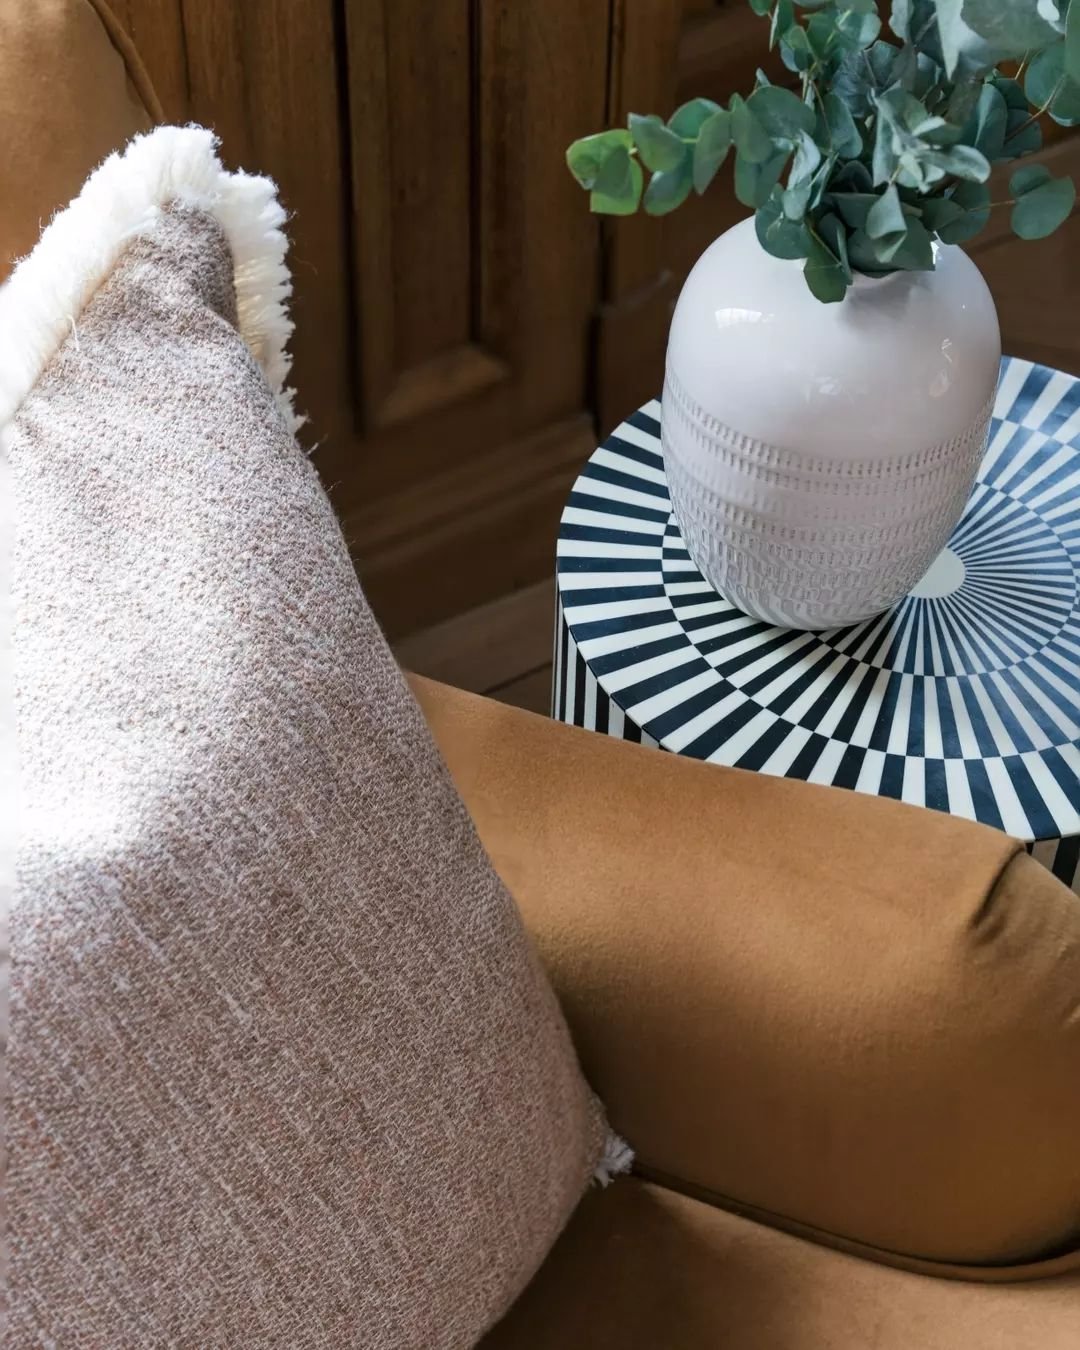 Step into @OldAbbeyHouse, where every detail is a whisper of luxury. 🌿✨
This cozy nook of the entrance hall captures our dedication to exquisite design, from the plush textures of our cushions to the bold stripes of the accent table. It's the perfec